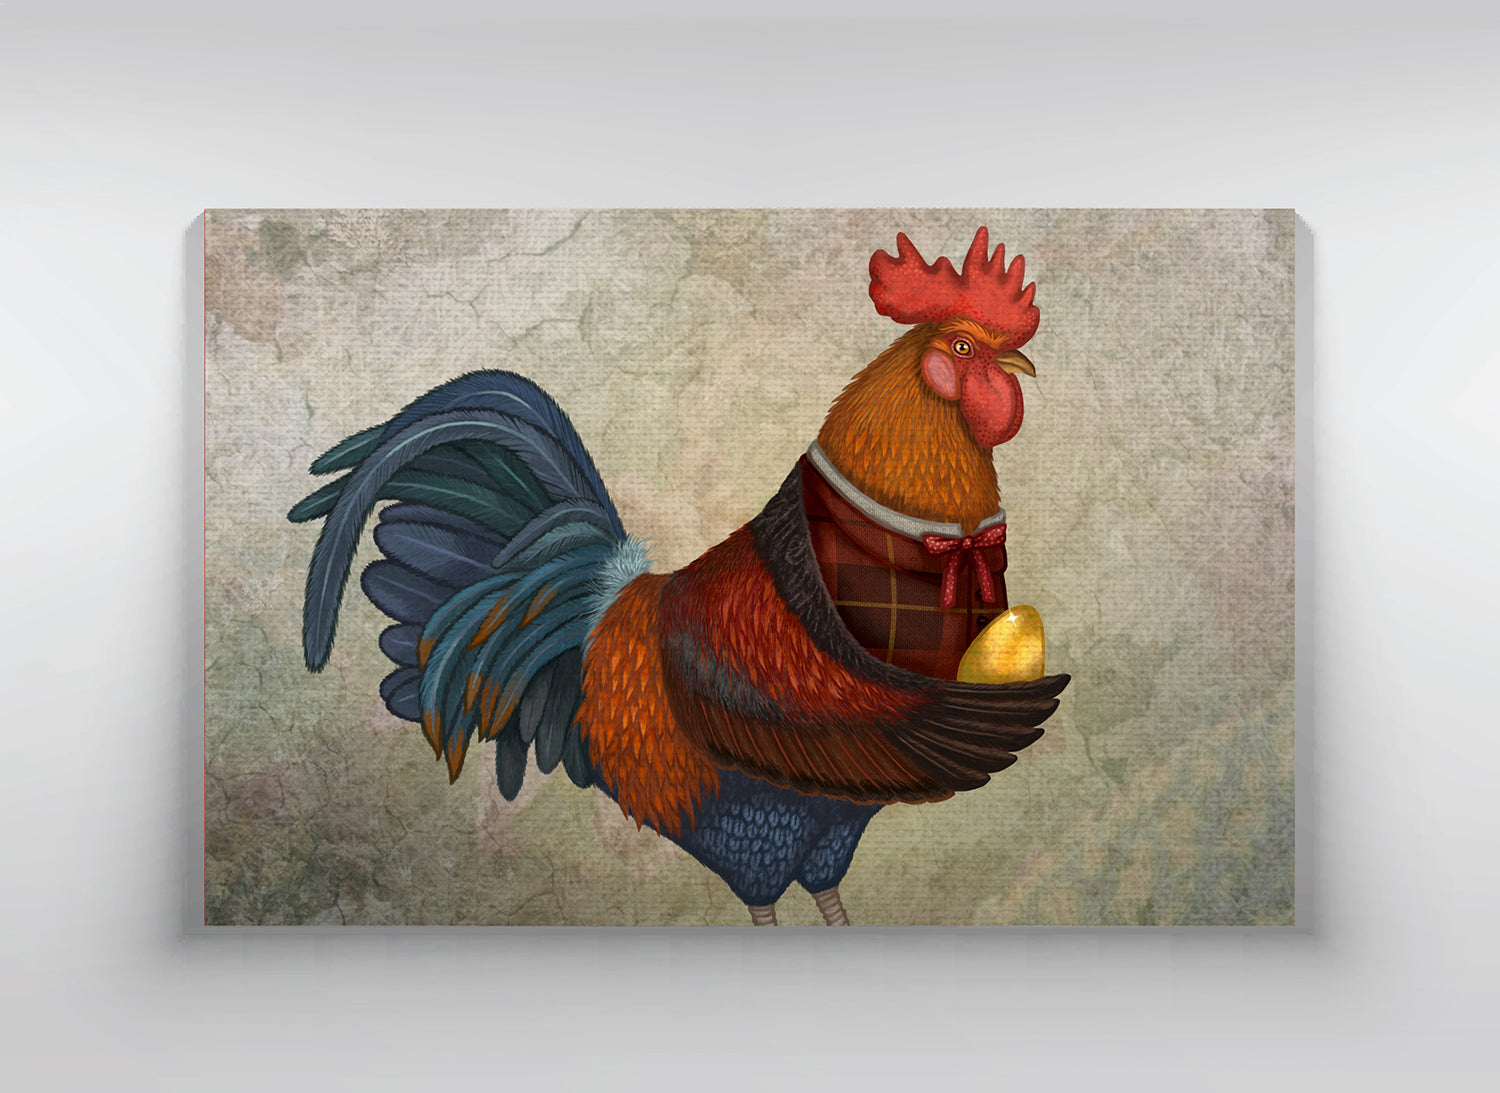 Canvas "If you were born lucky, even your rooster will lay eggs" (Rooster)